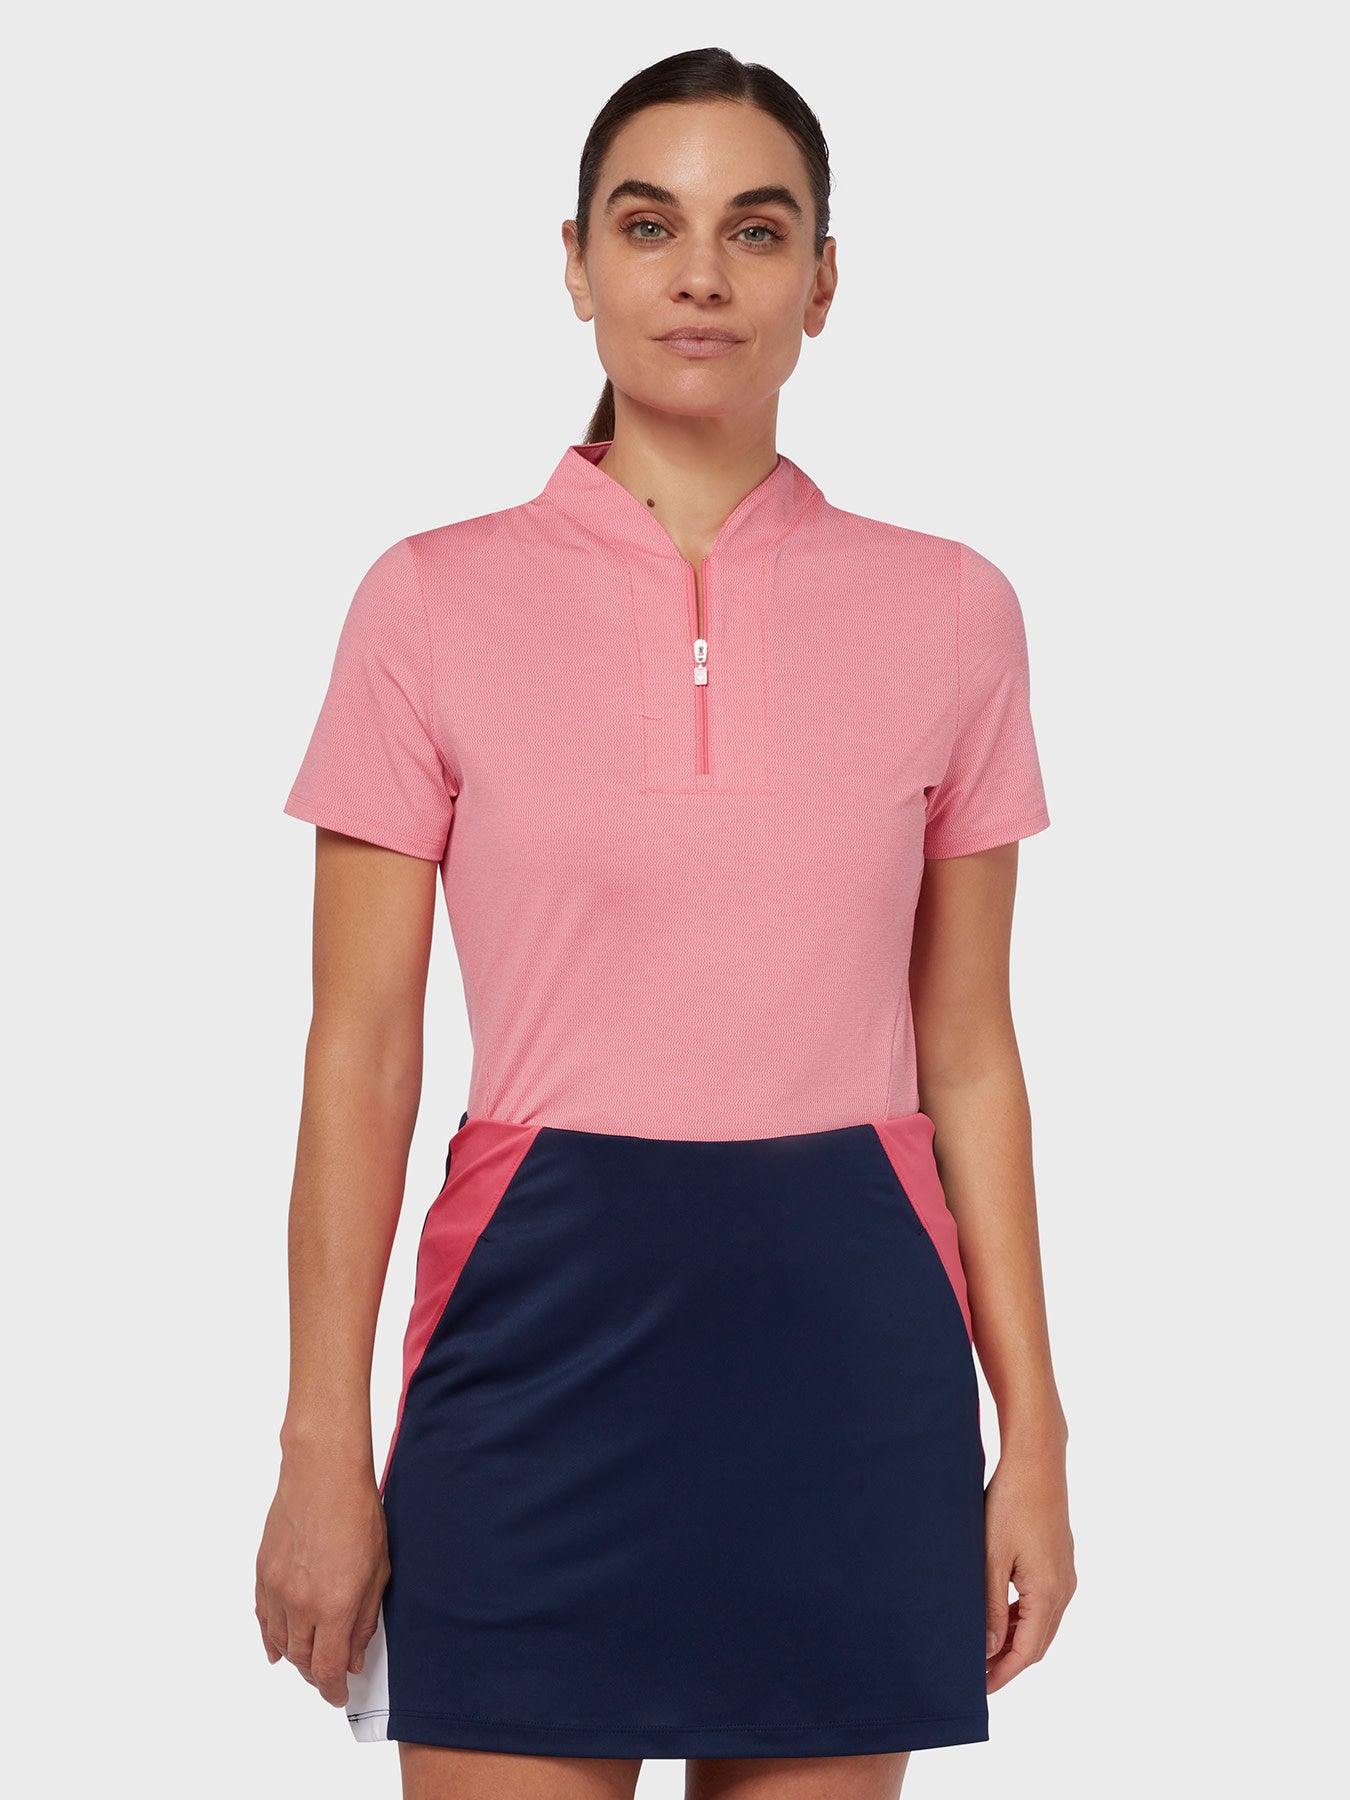 View Tonal Texture Heather Polo Top In Fruit Dove Heather information